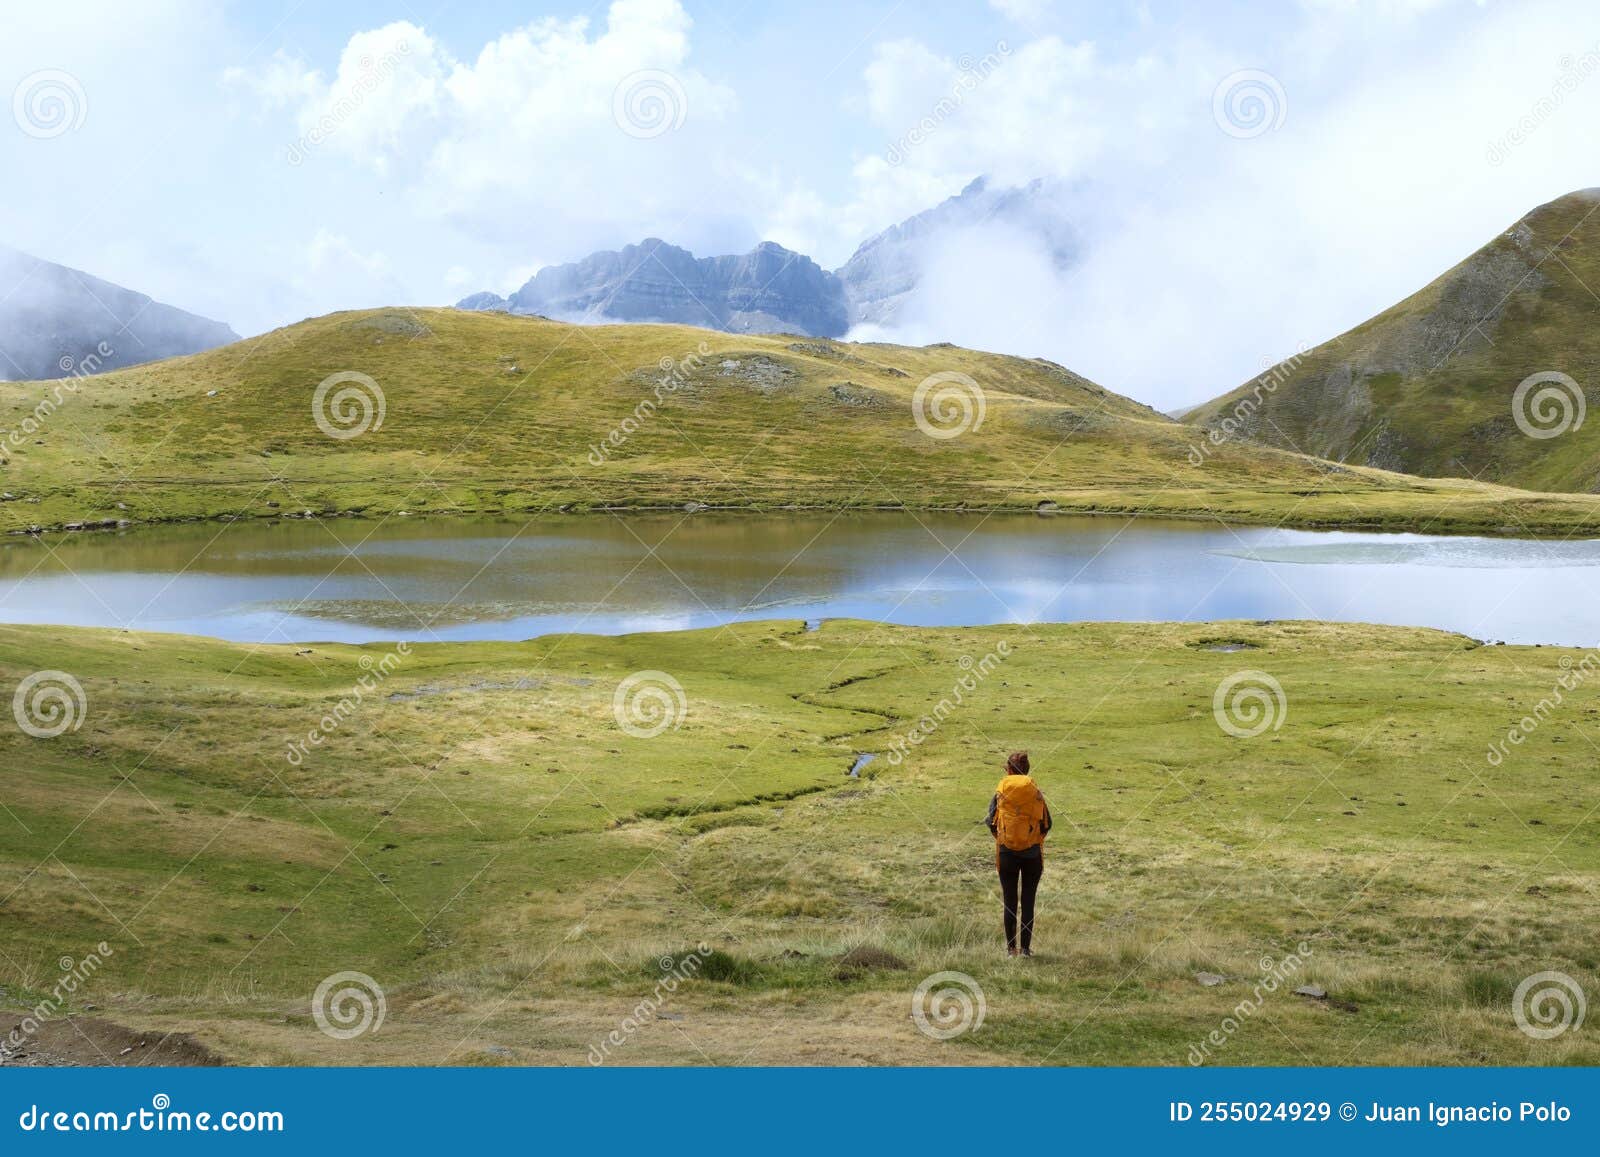 hiker with yellow backpack in the ibon de escalar, western valleys natural park, huesca pyrenees